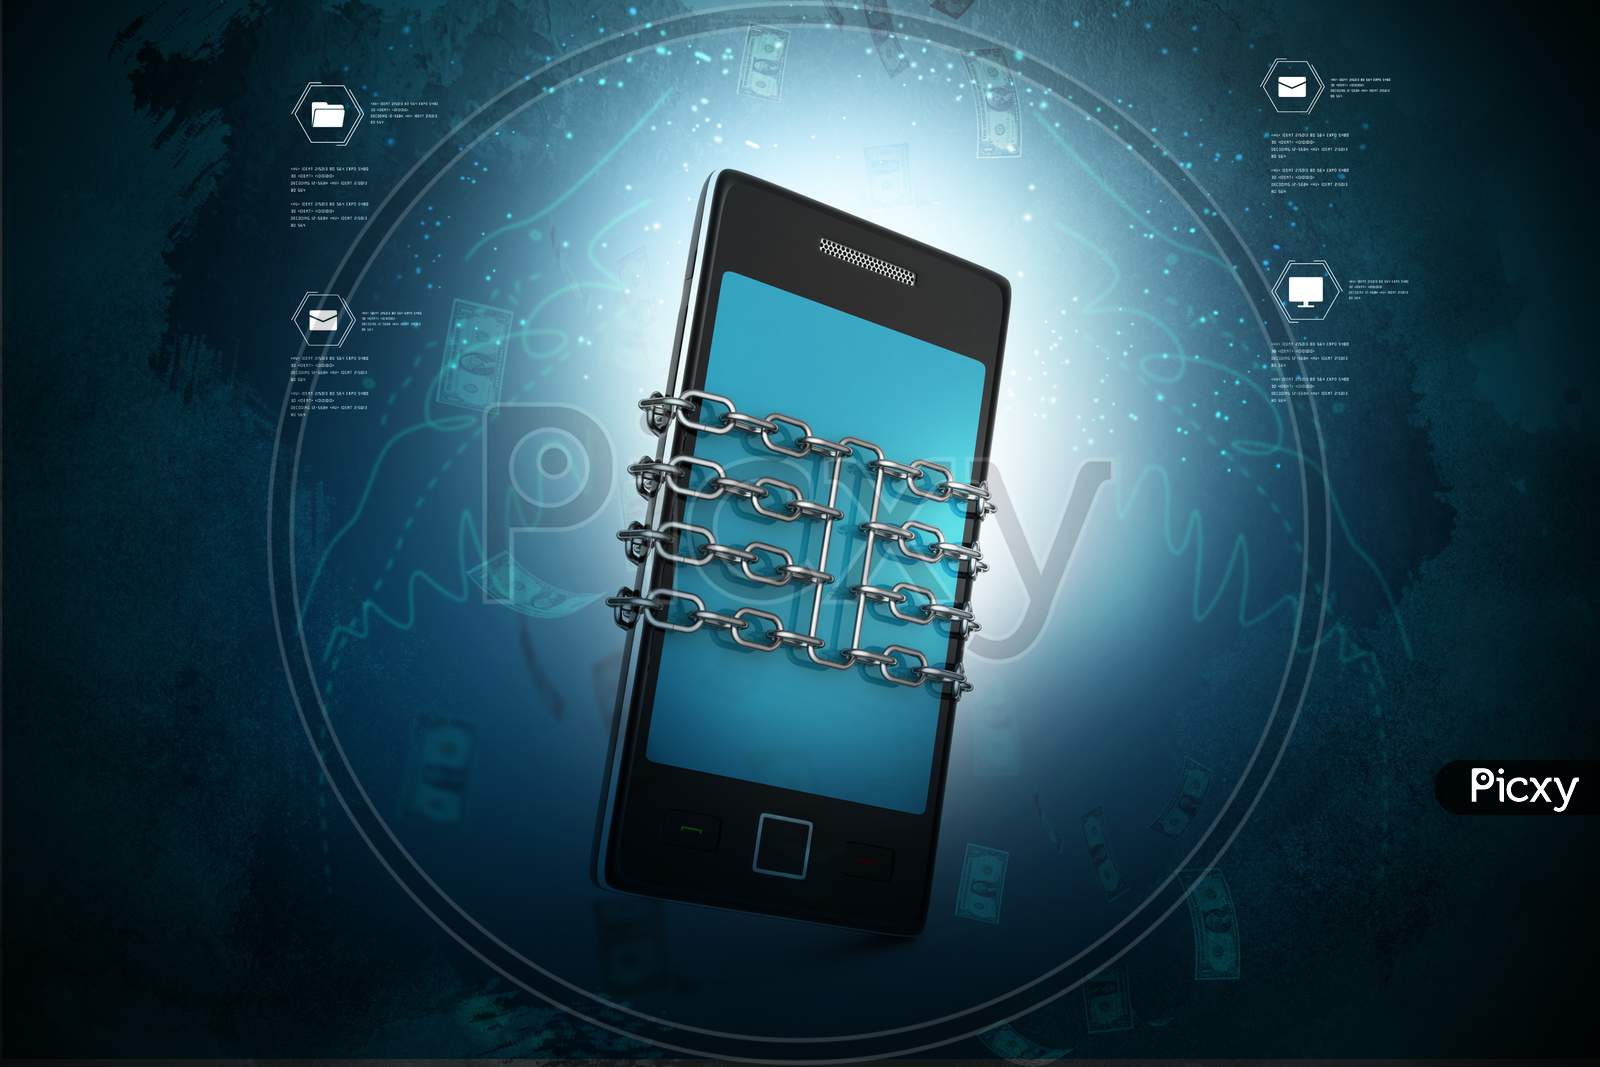 A Smartphone locked with Chains - Concept of Mobile Security